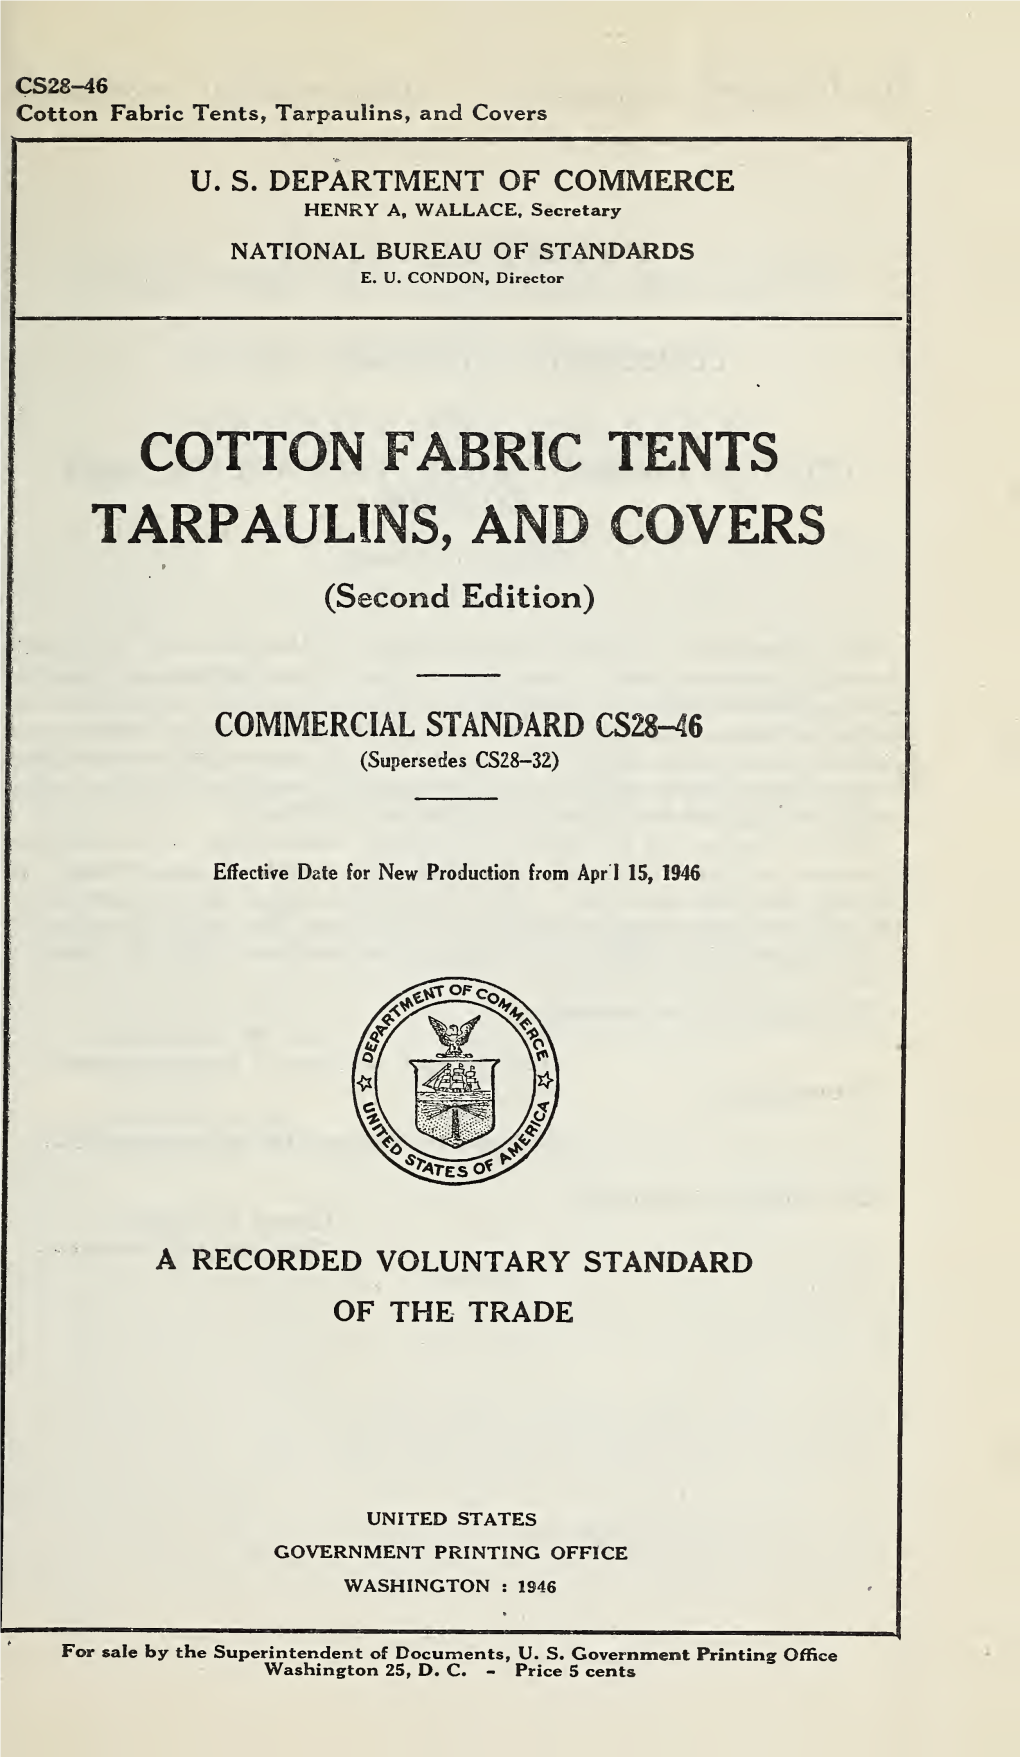 Cotton Fabric Tents Tarpaulins, and Covers